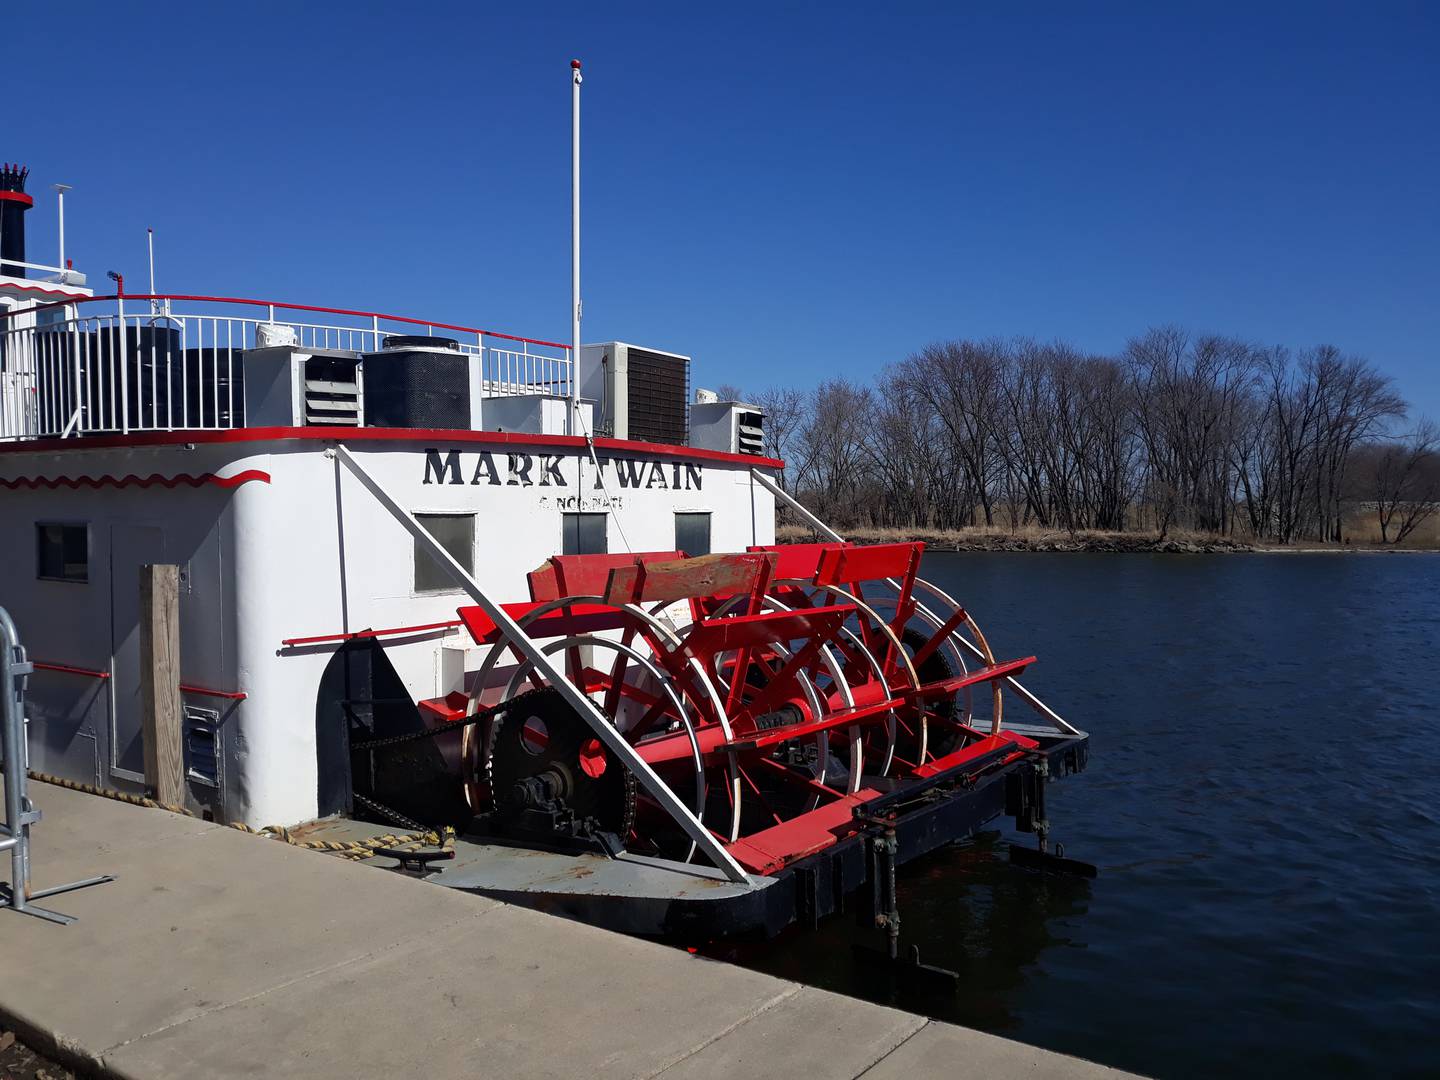 Setting the boat apart from the herd, the twin paddlewheels on The Sainte Genevieve now docked in Ottawa aren’t just for show — they’re the boat’s sole source of propulsion. This creates a leisurely throwback experience, best enjoyed from the vessel’s open-air, top deck.